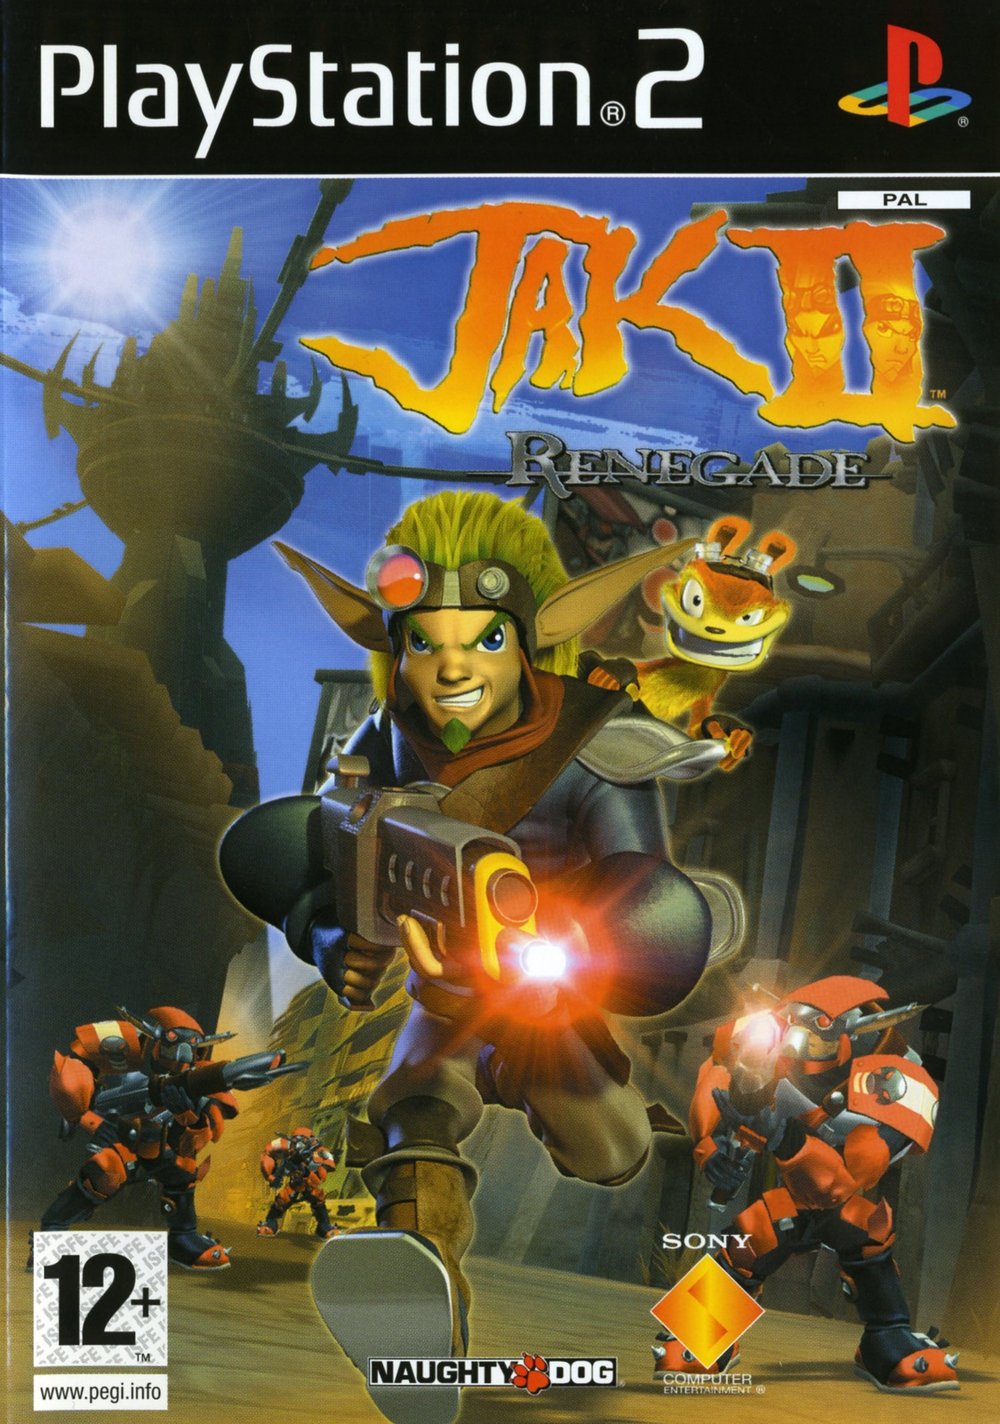 Game jack 2. Jak II - Renegade обложка ps2. Jacked ps2. Sony PLAYSTATION 2 ps2. Jak and Daxter 1 ps2.